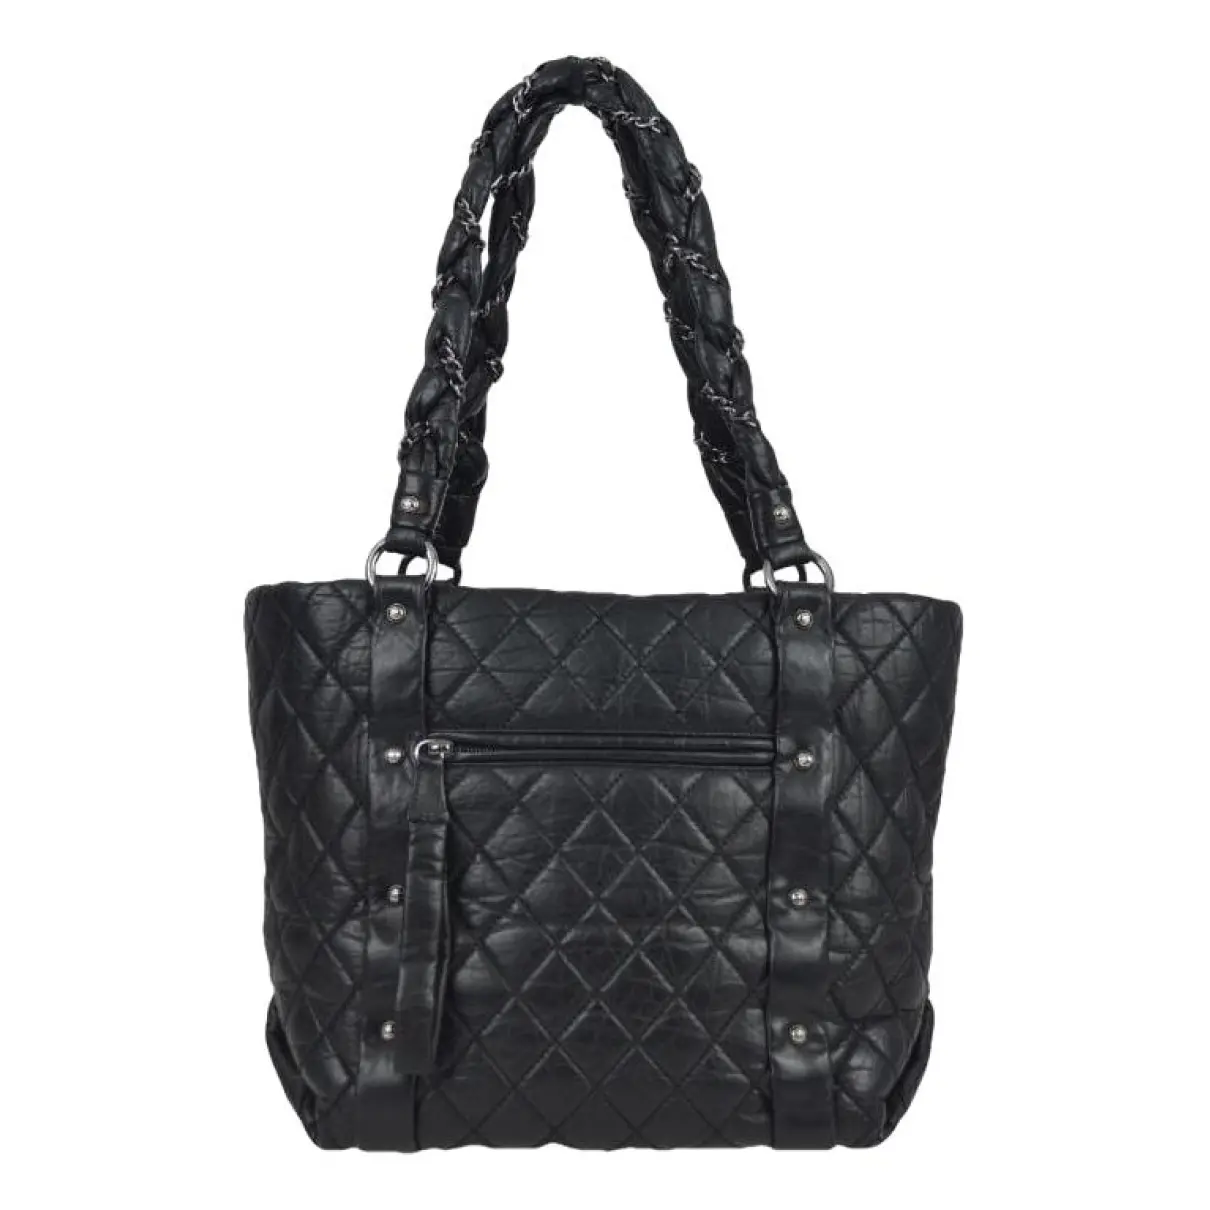 Classic CC Shopping leather tote